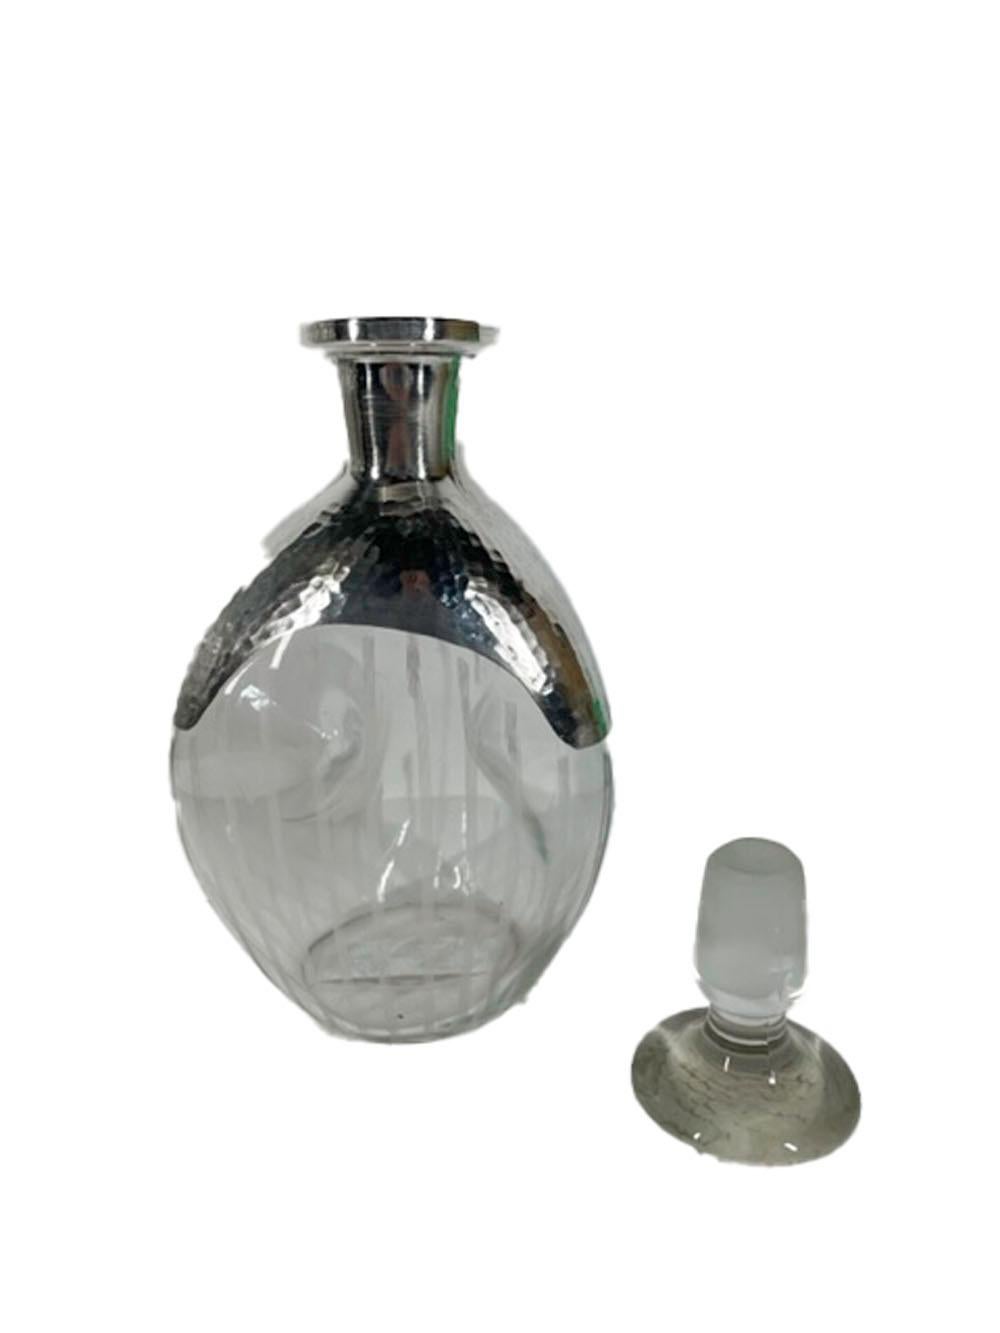 American Art Deco Pinch Decanter with Hammered Silver Overlay and Vertical Etched Lines